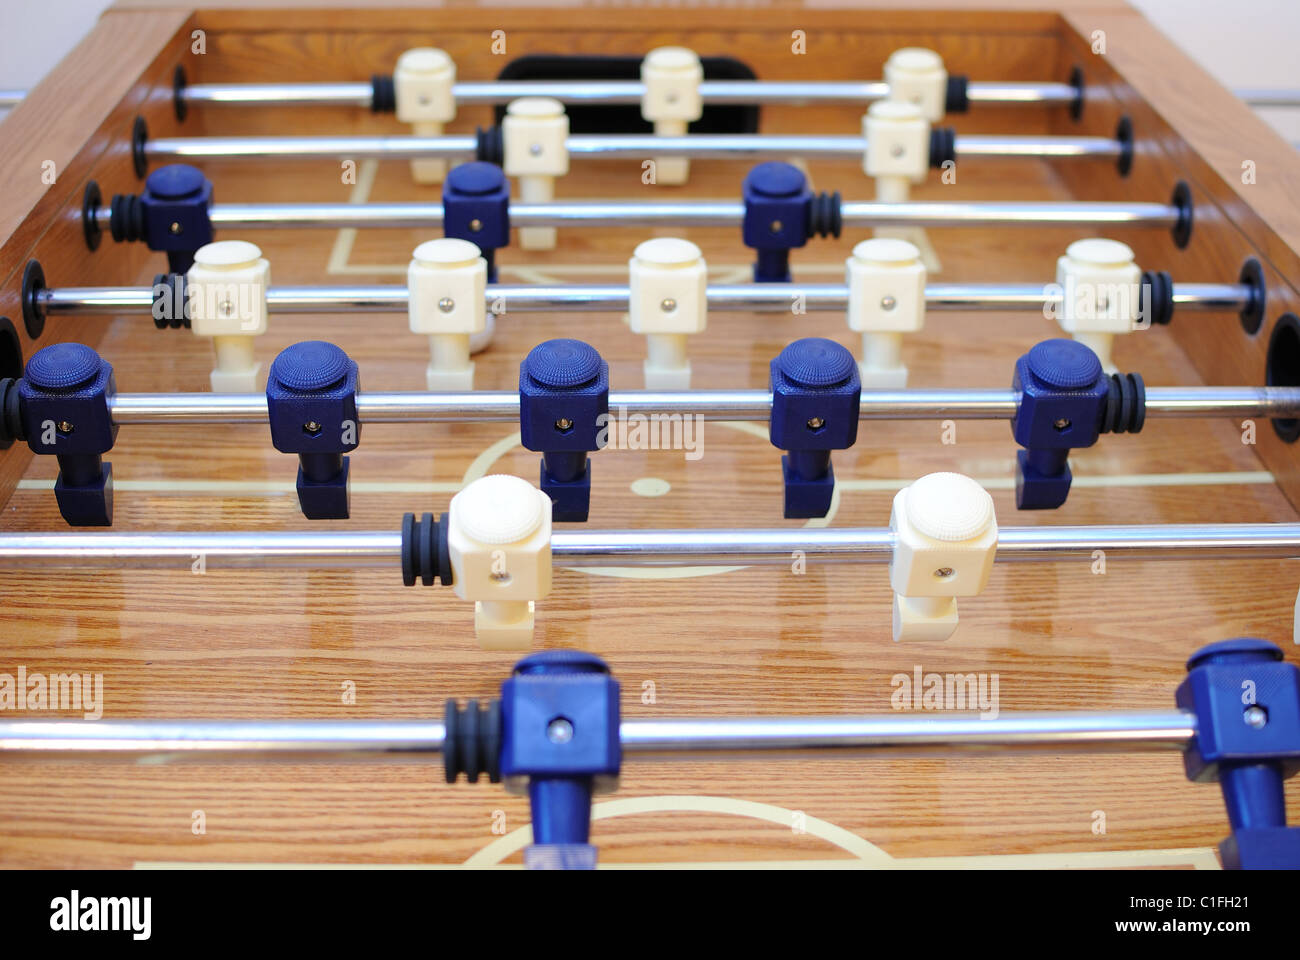 Foosball table in a carpeted room Stock Photo